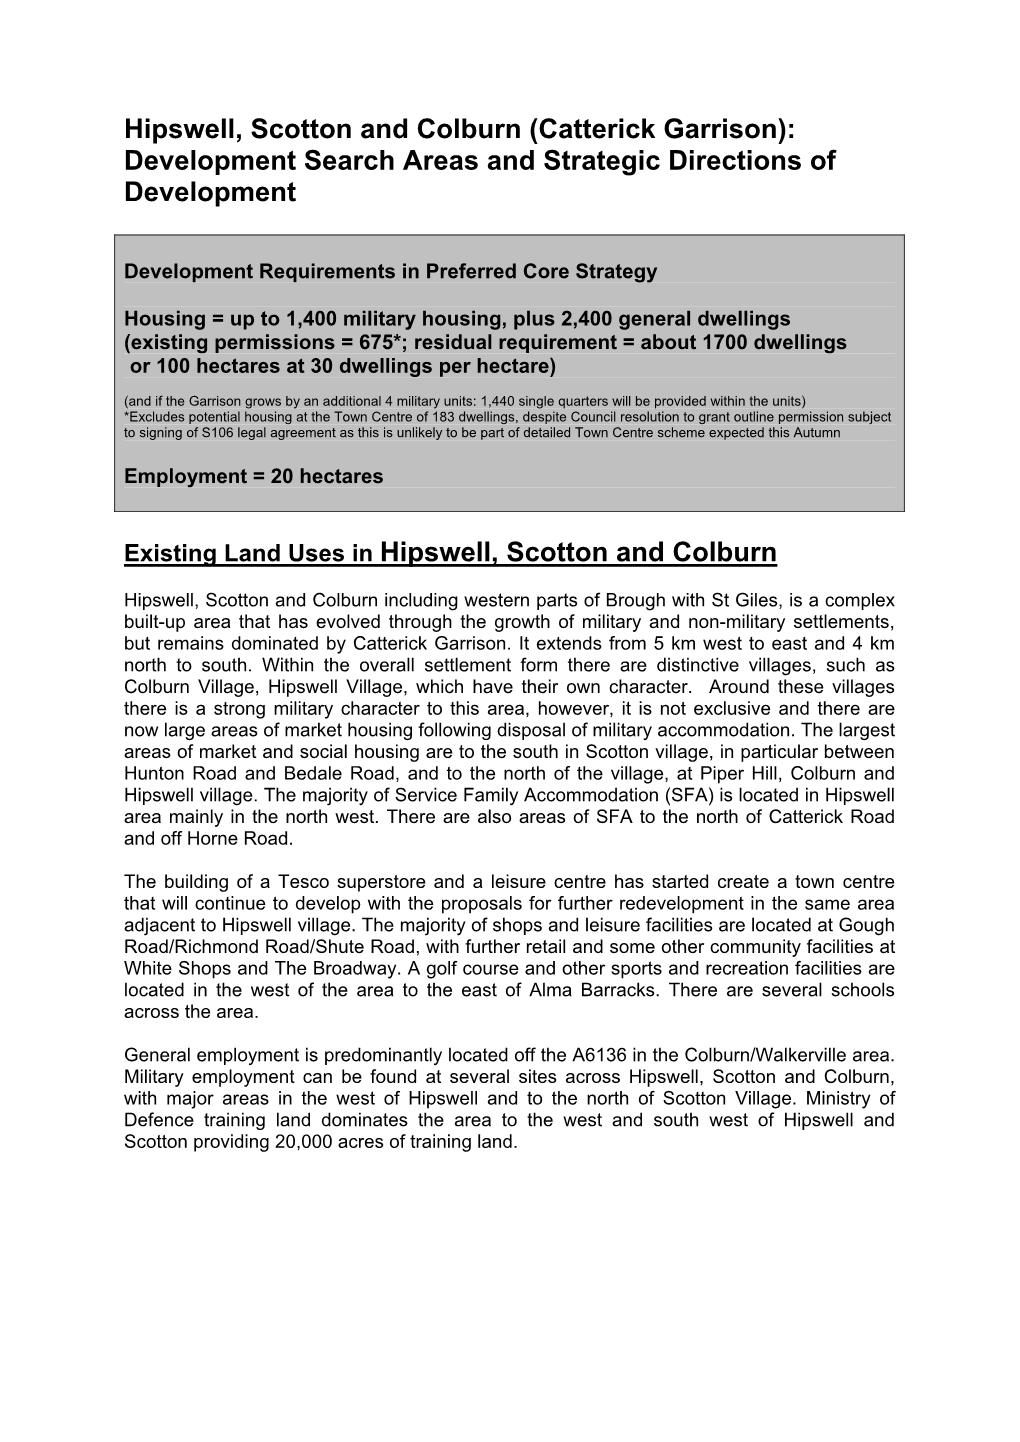 Hipswell, Scotton and Colburn (Catterick Garrison): Development Search Areas and Strategic Directions of Development